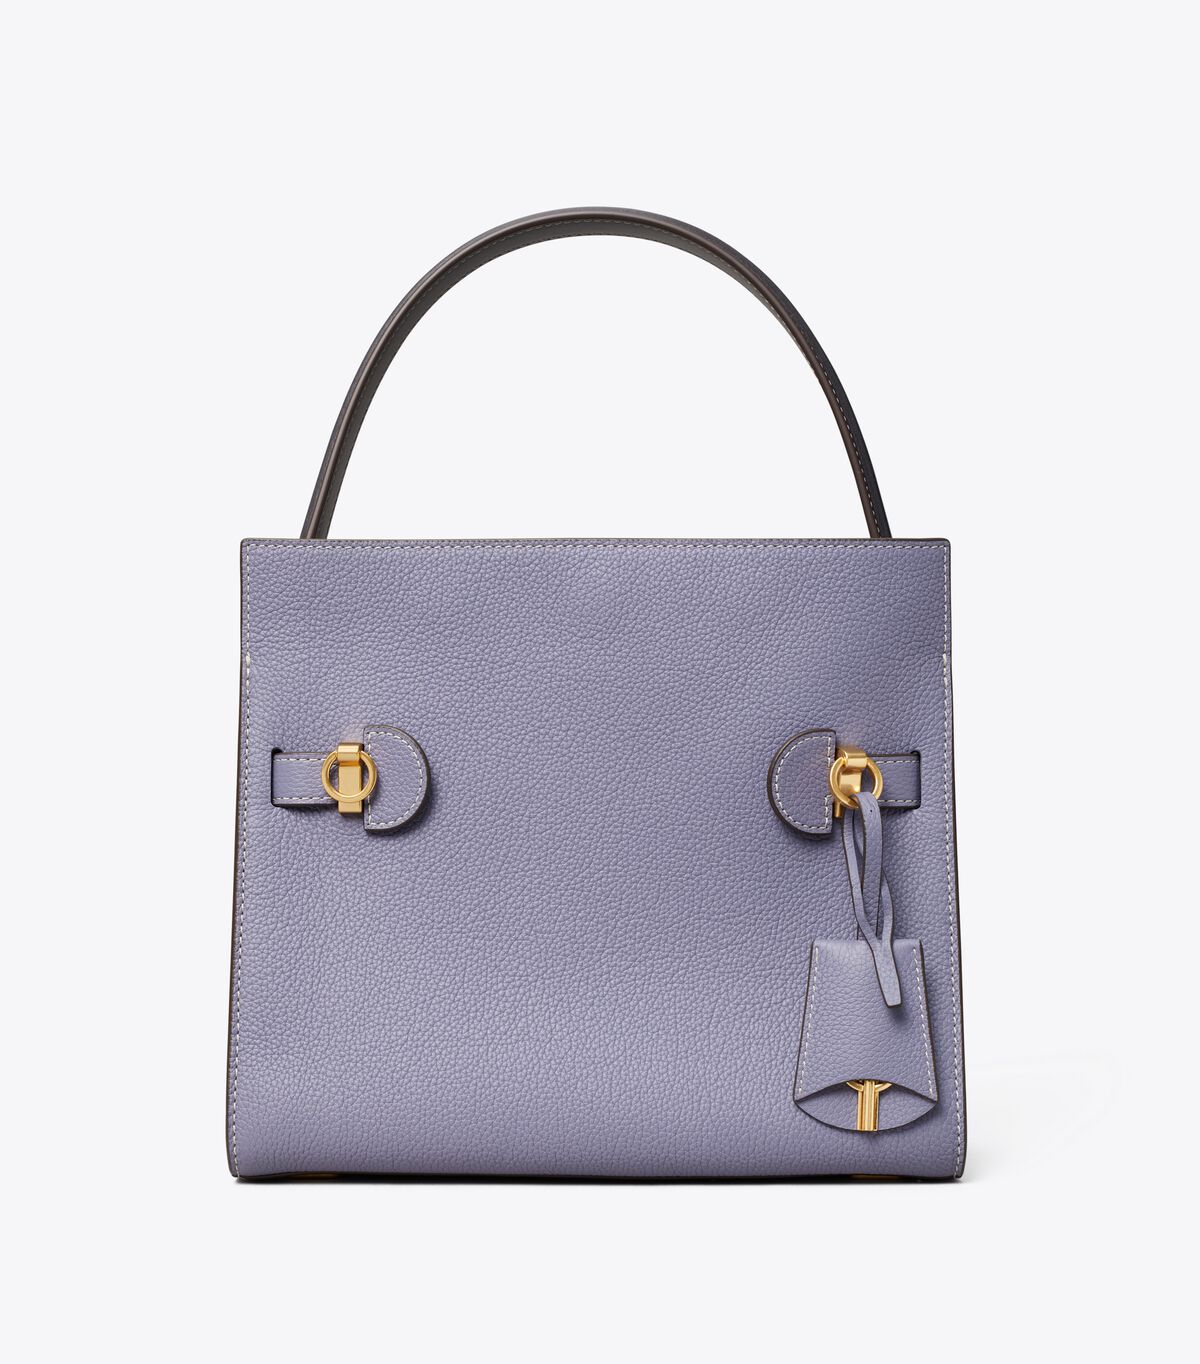 Lee Radziwill Pebbled Small Double Bag